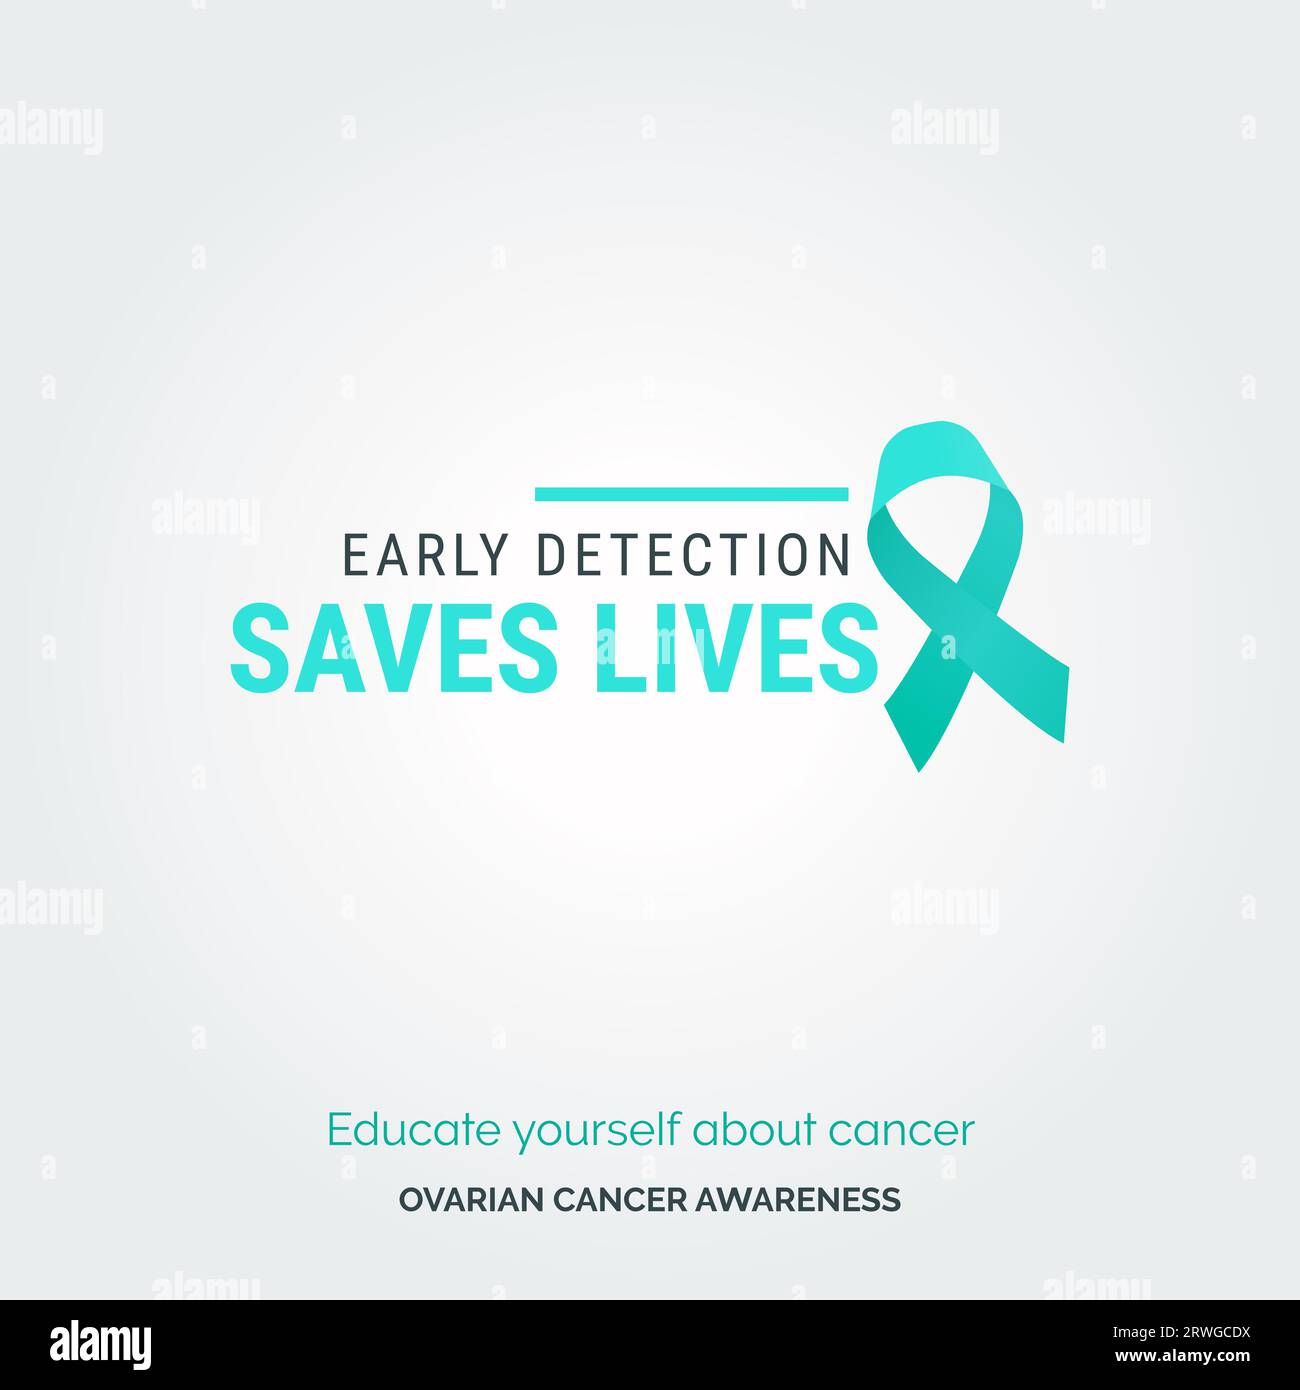 Radiate Awareness. Ovarian Health Campaign Posters Stock Vector Image ...